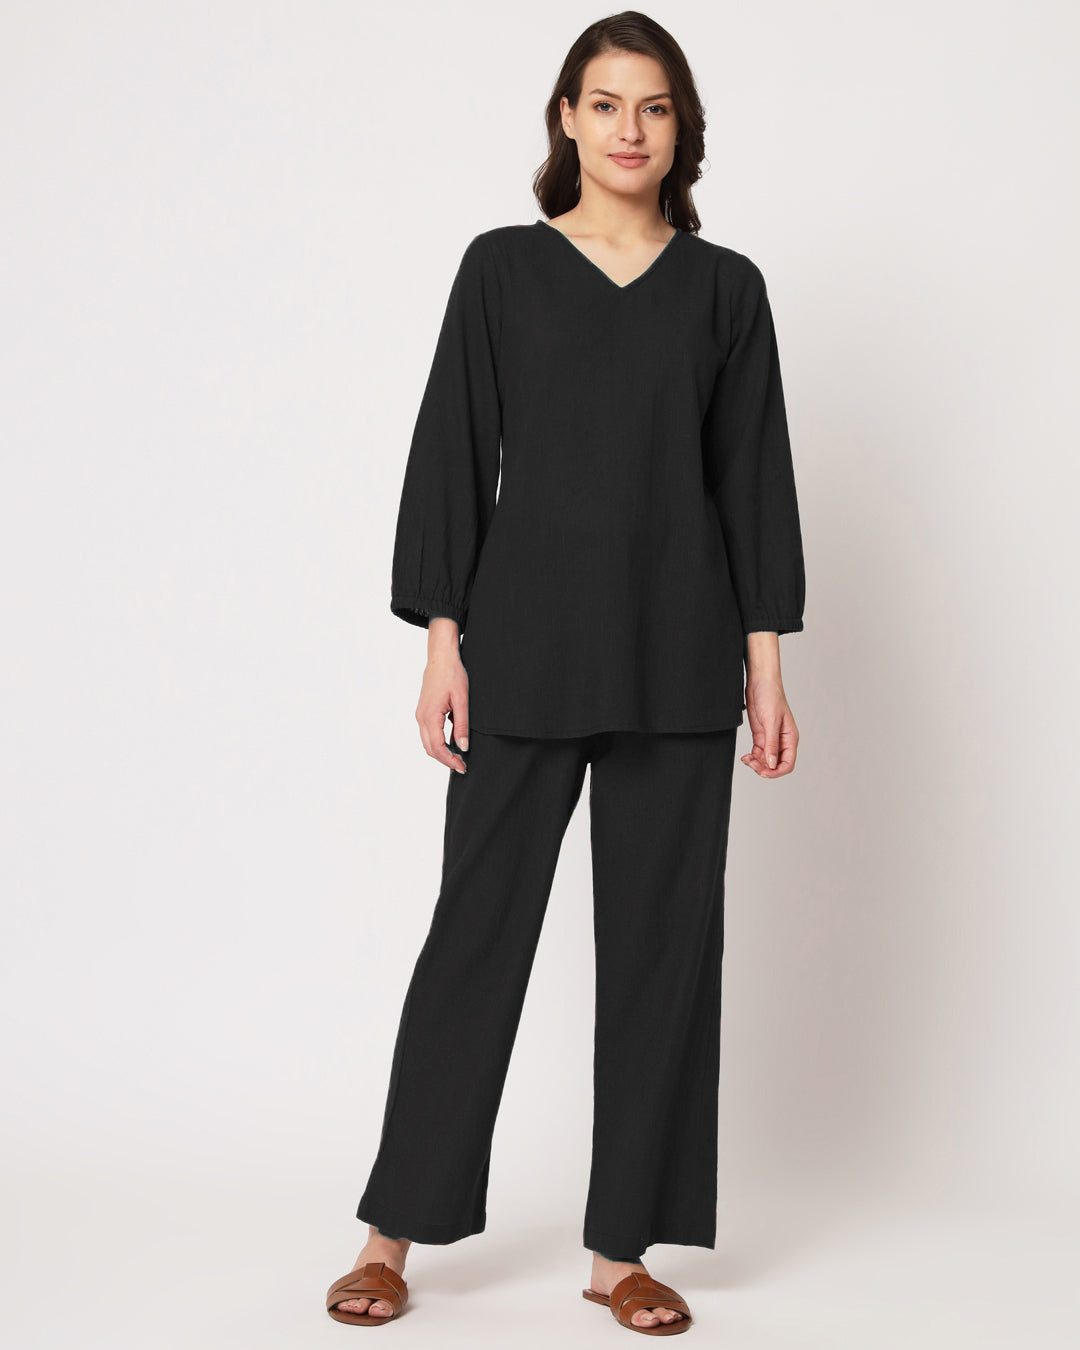 Classic Black Bishop Sleeves Solid Top (Without Bottoms)